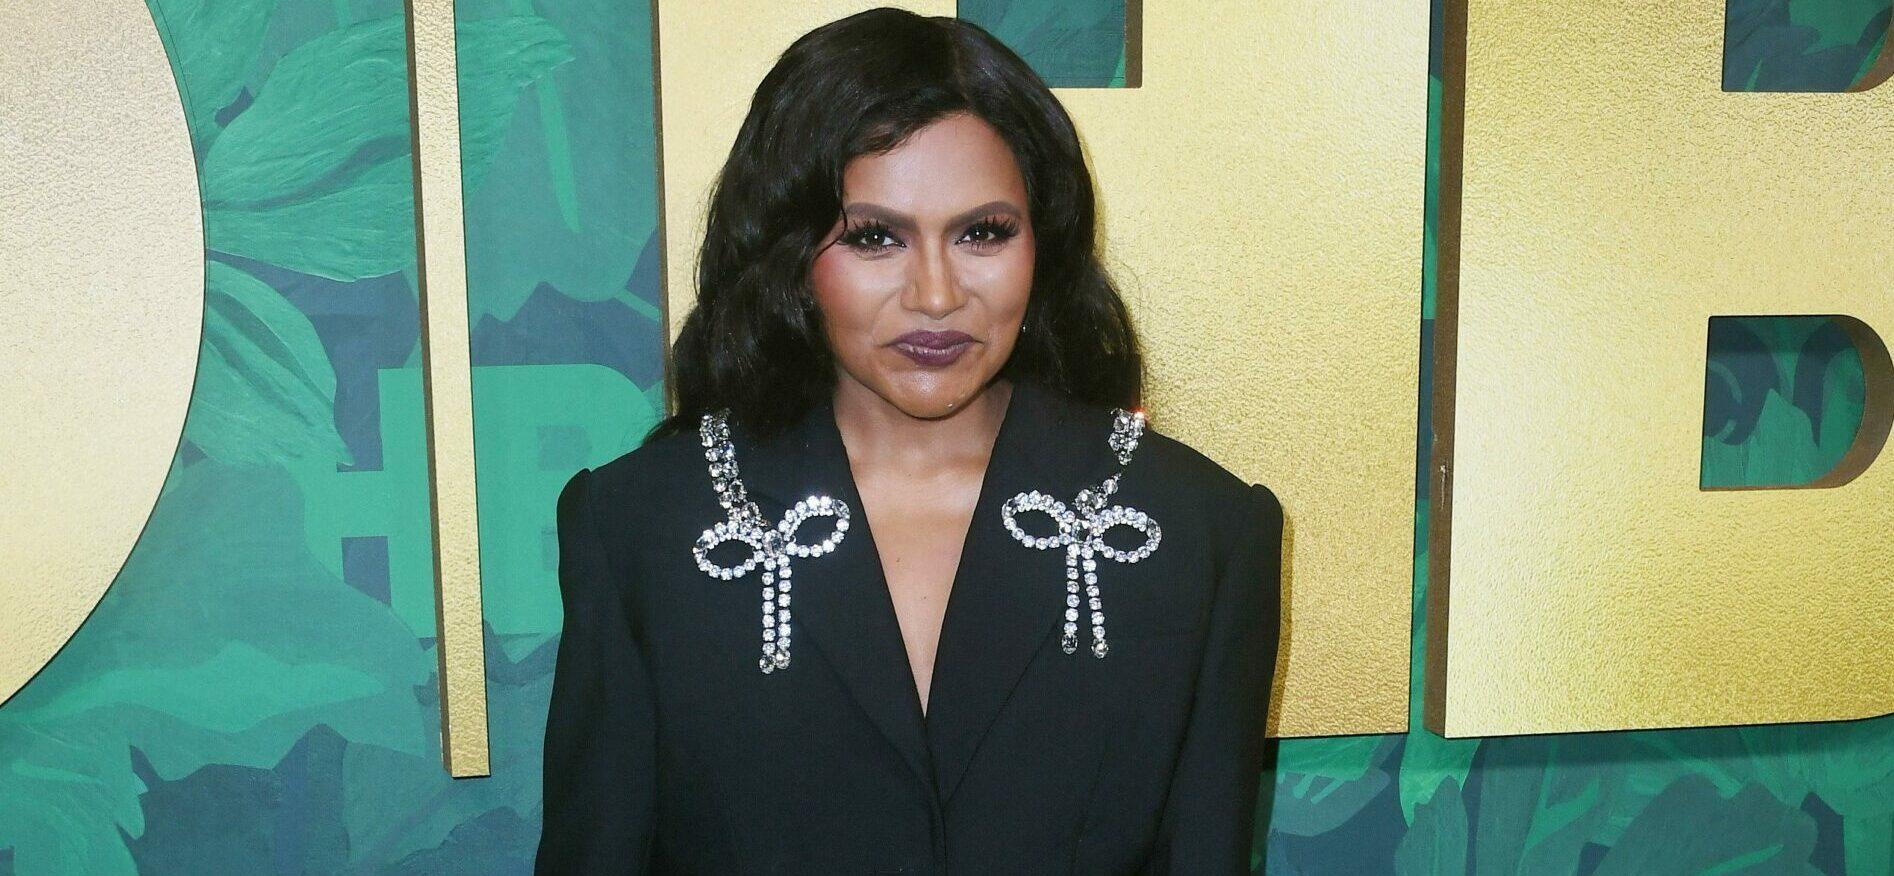 Mindy Kaling Explains Why ‘The Office’ Is ‘So Inappropriate’ For Today’s Viewers